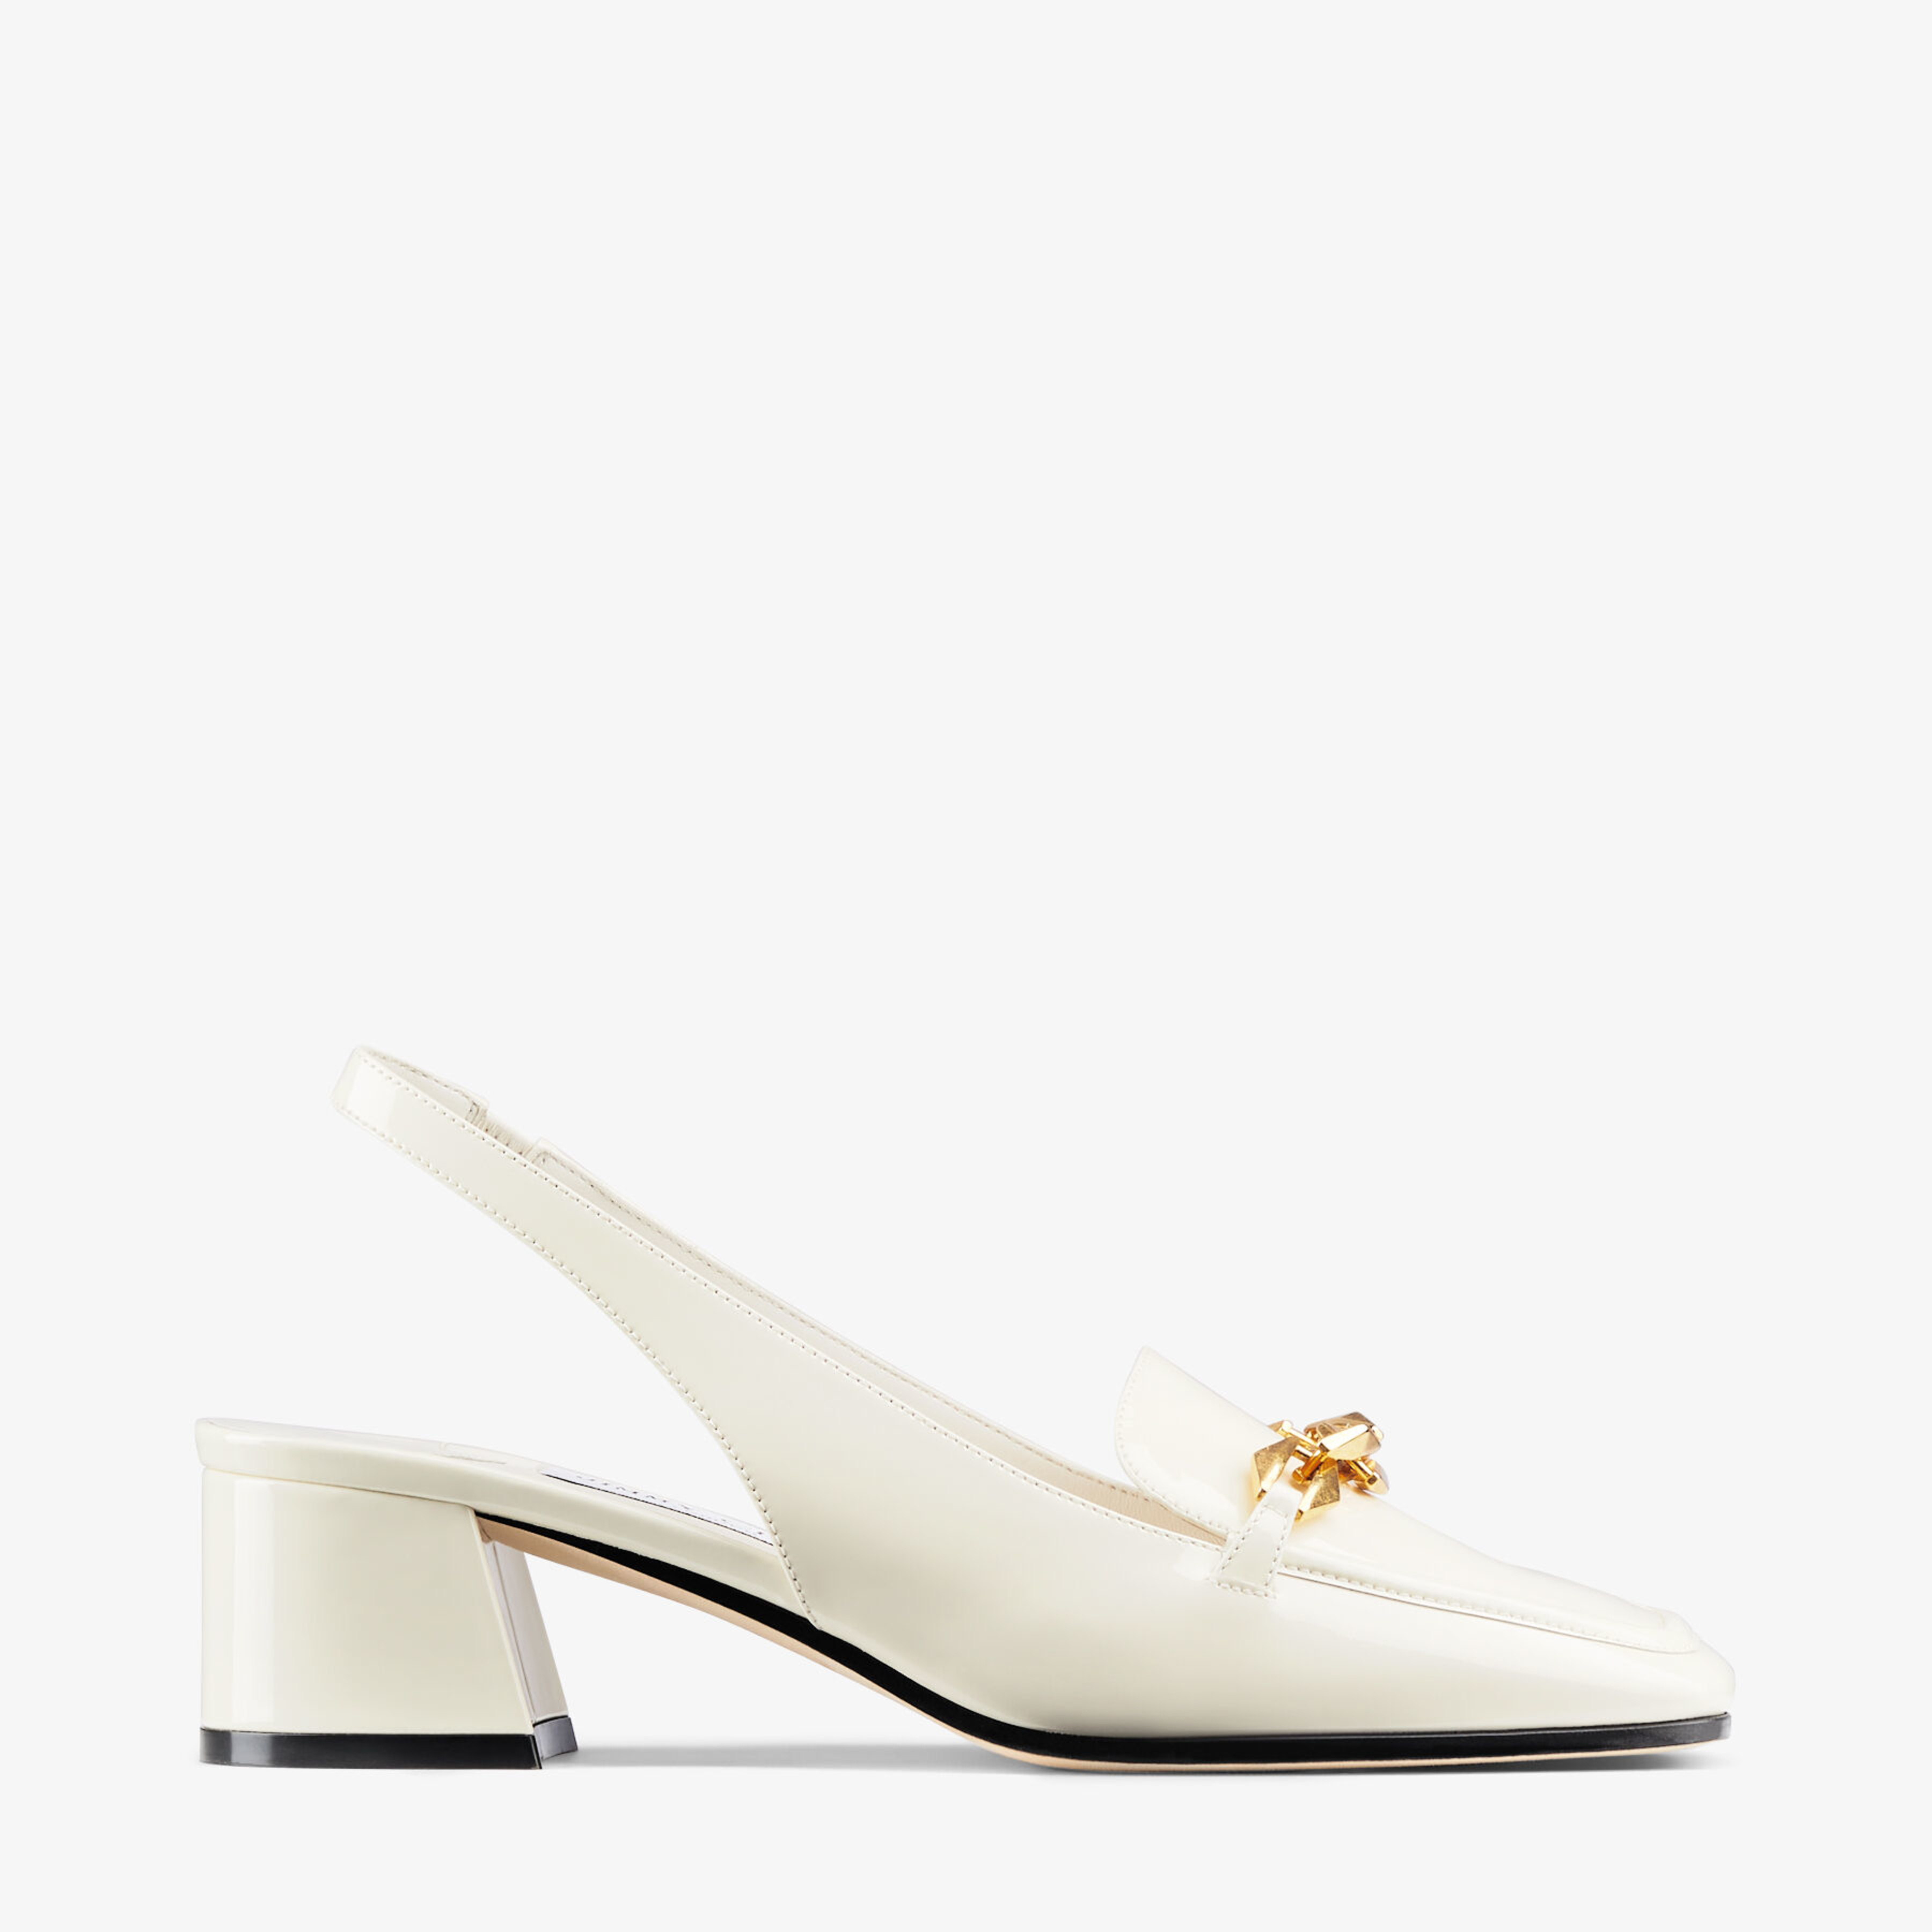 Jimmy Choo - Latte Soft Patent Leather Sling Back Pumps with Chain Embellishment